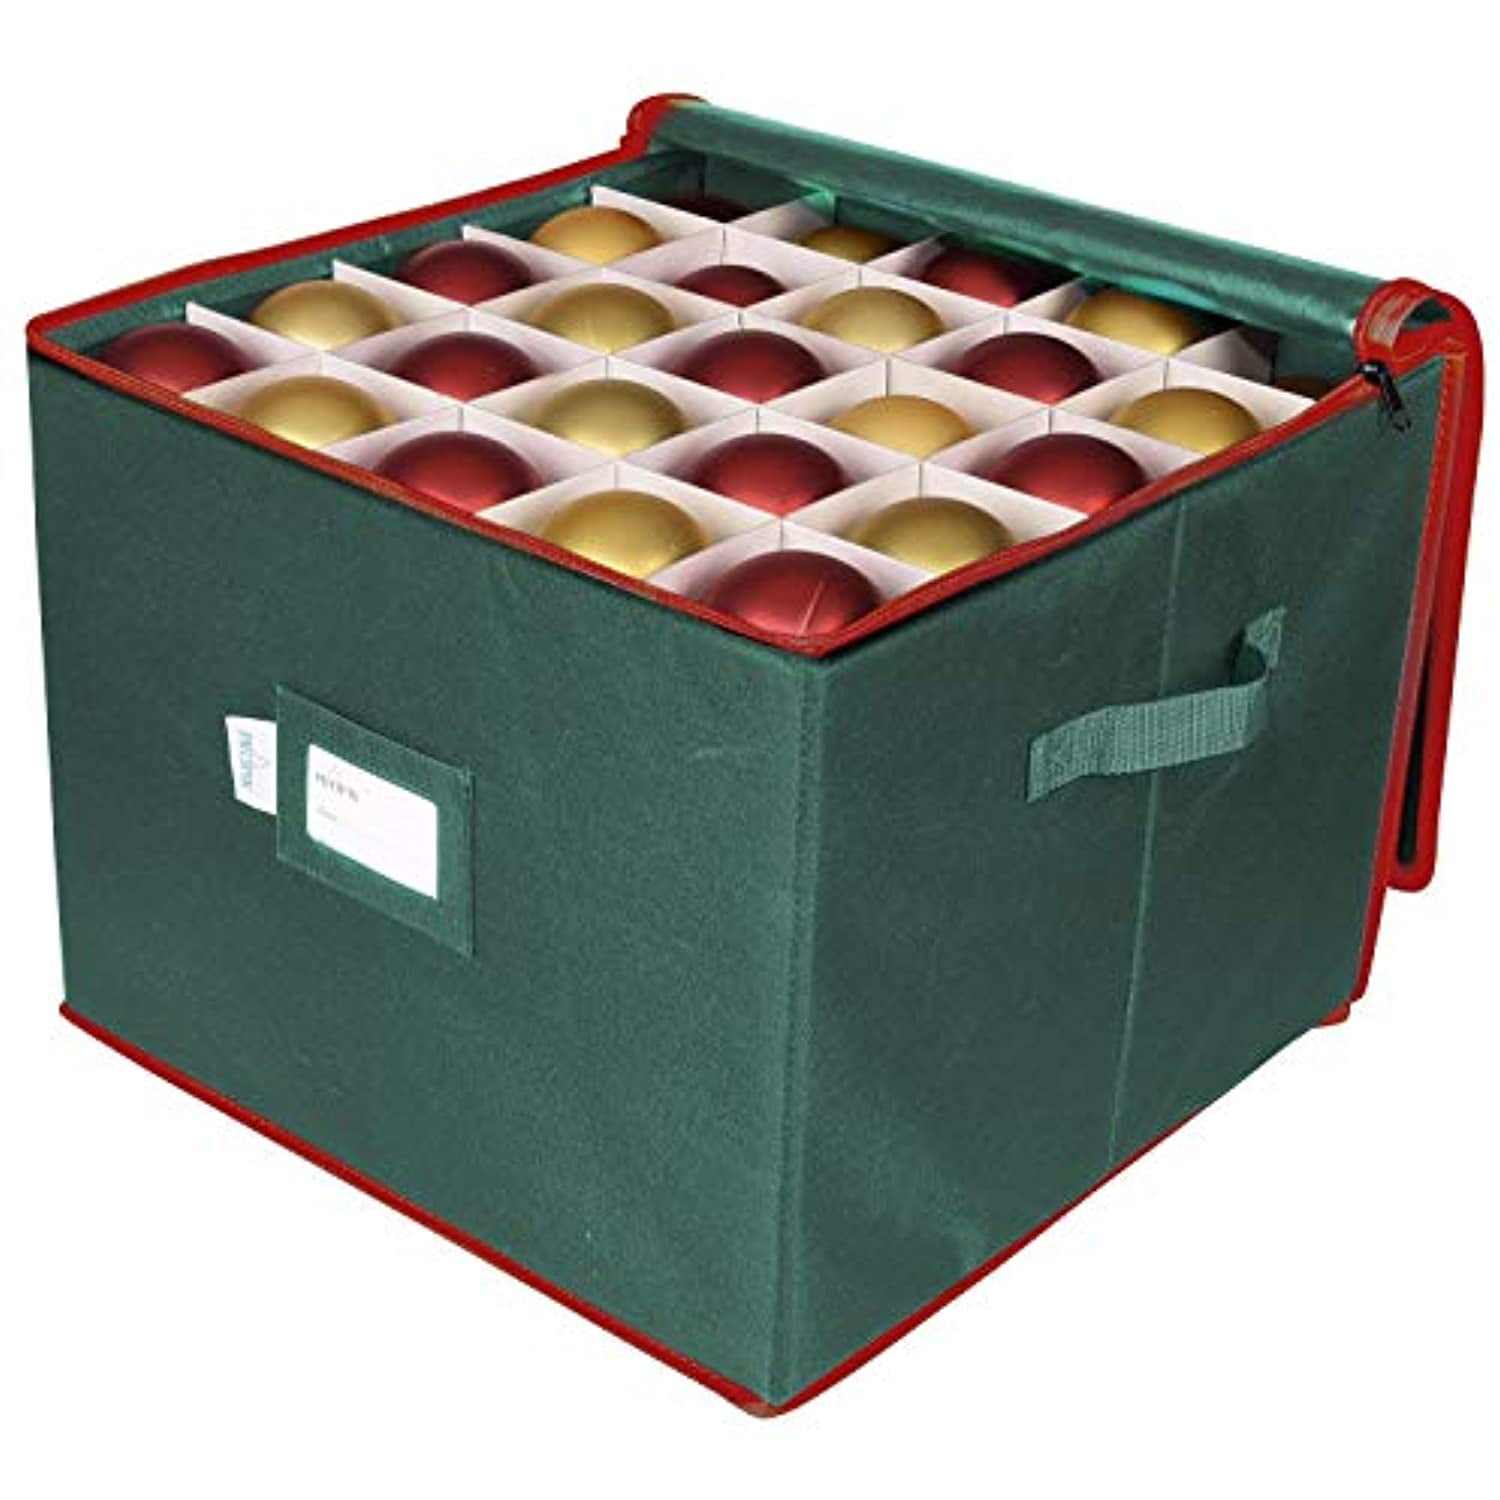  ProPik Christmas Ornament Storage Boxes with Dividers